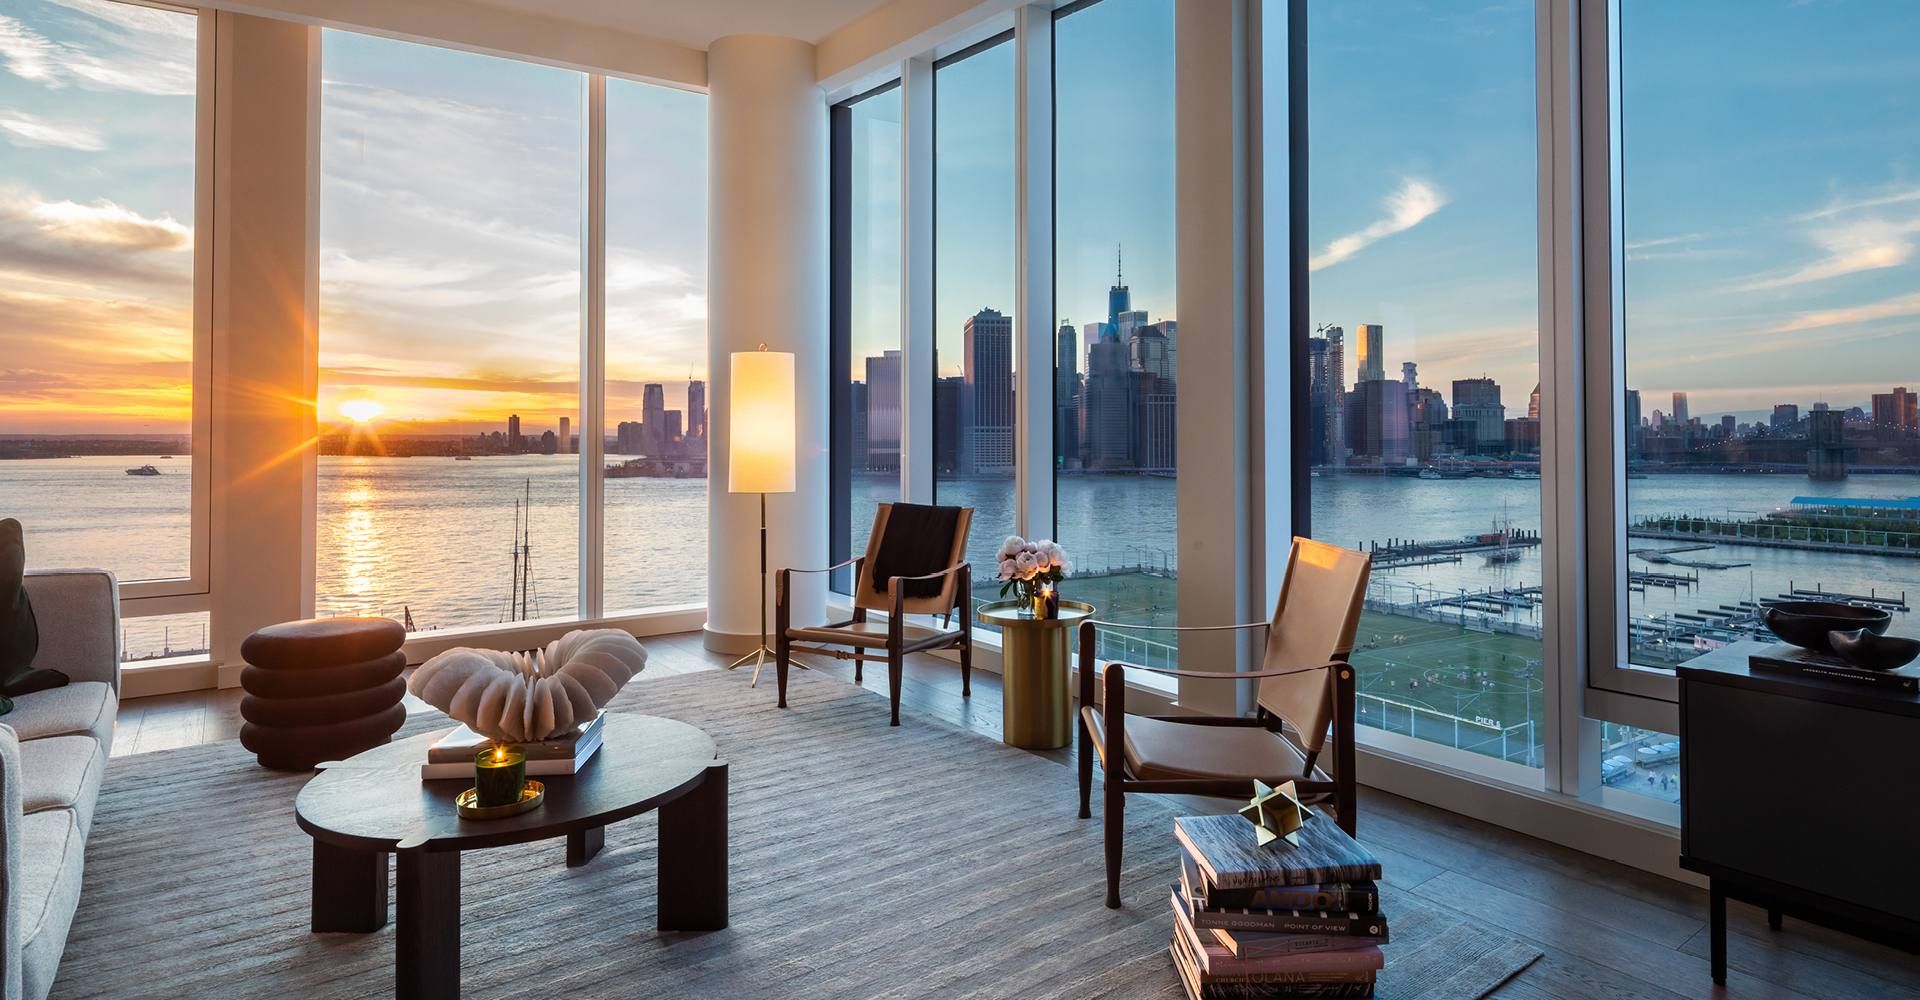 Interior view from Quay Tower luxury condos in Brooklyn, NY. Corner living room with tall windows and city views.